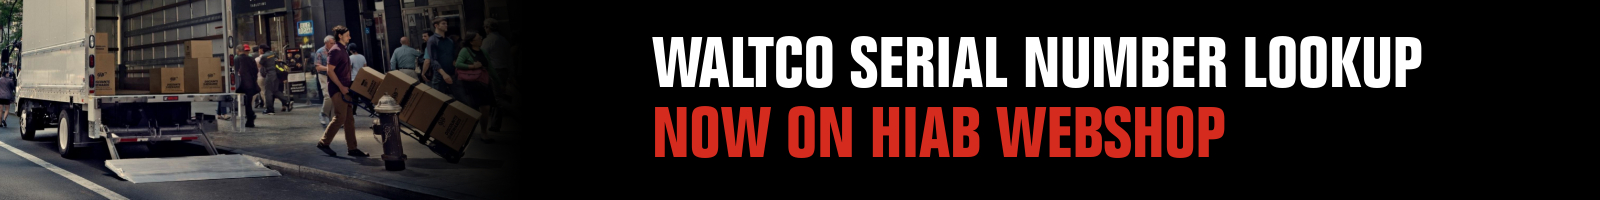 waltco-serial-number-lookup-on-page-banner.jpeg